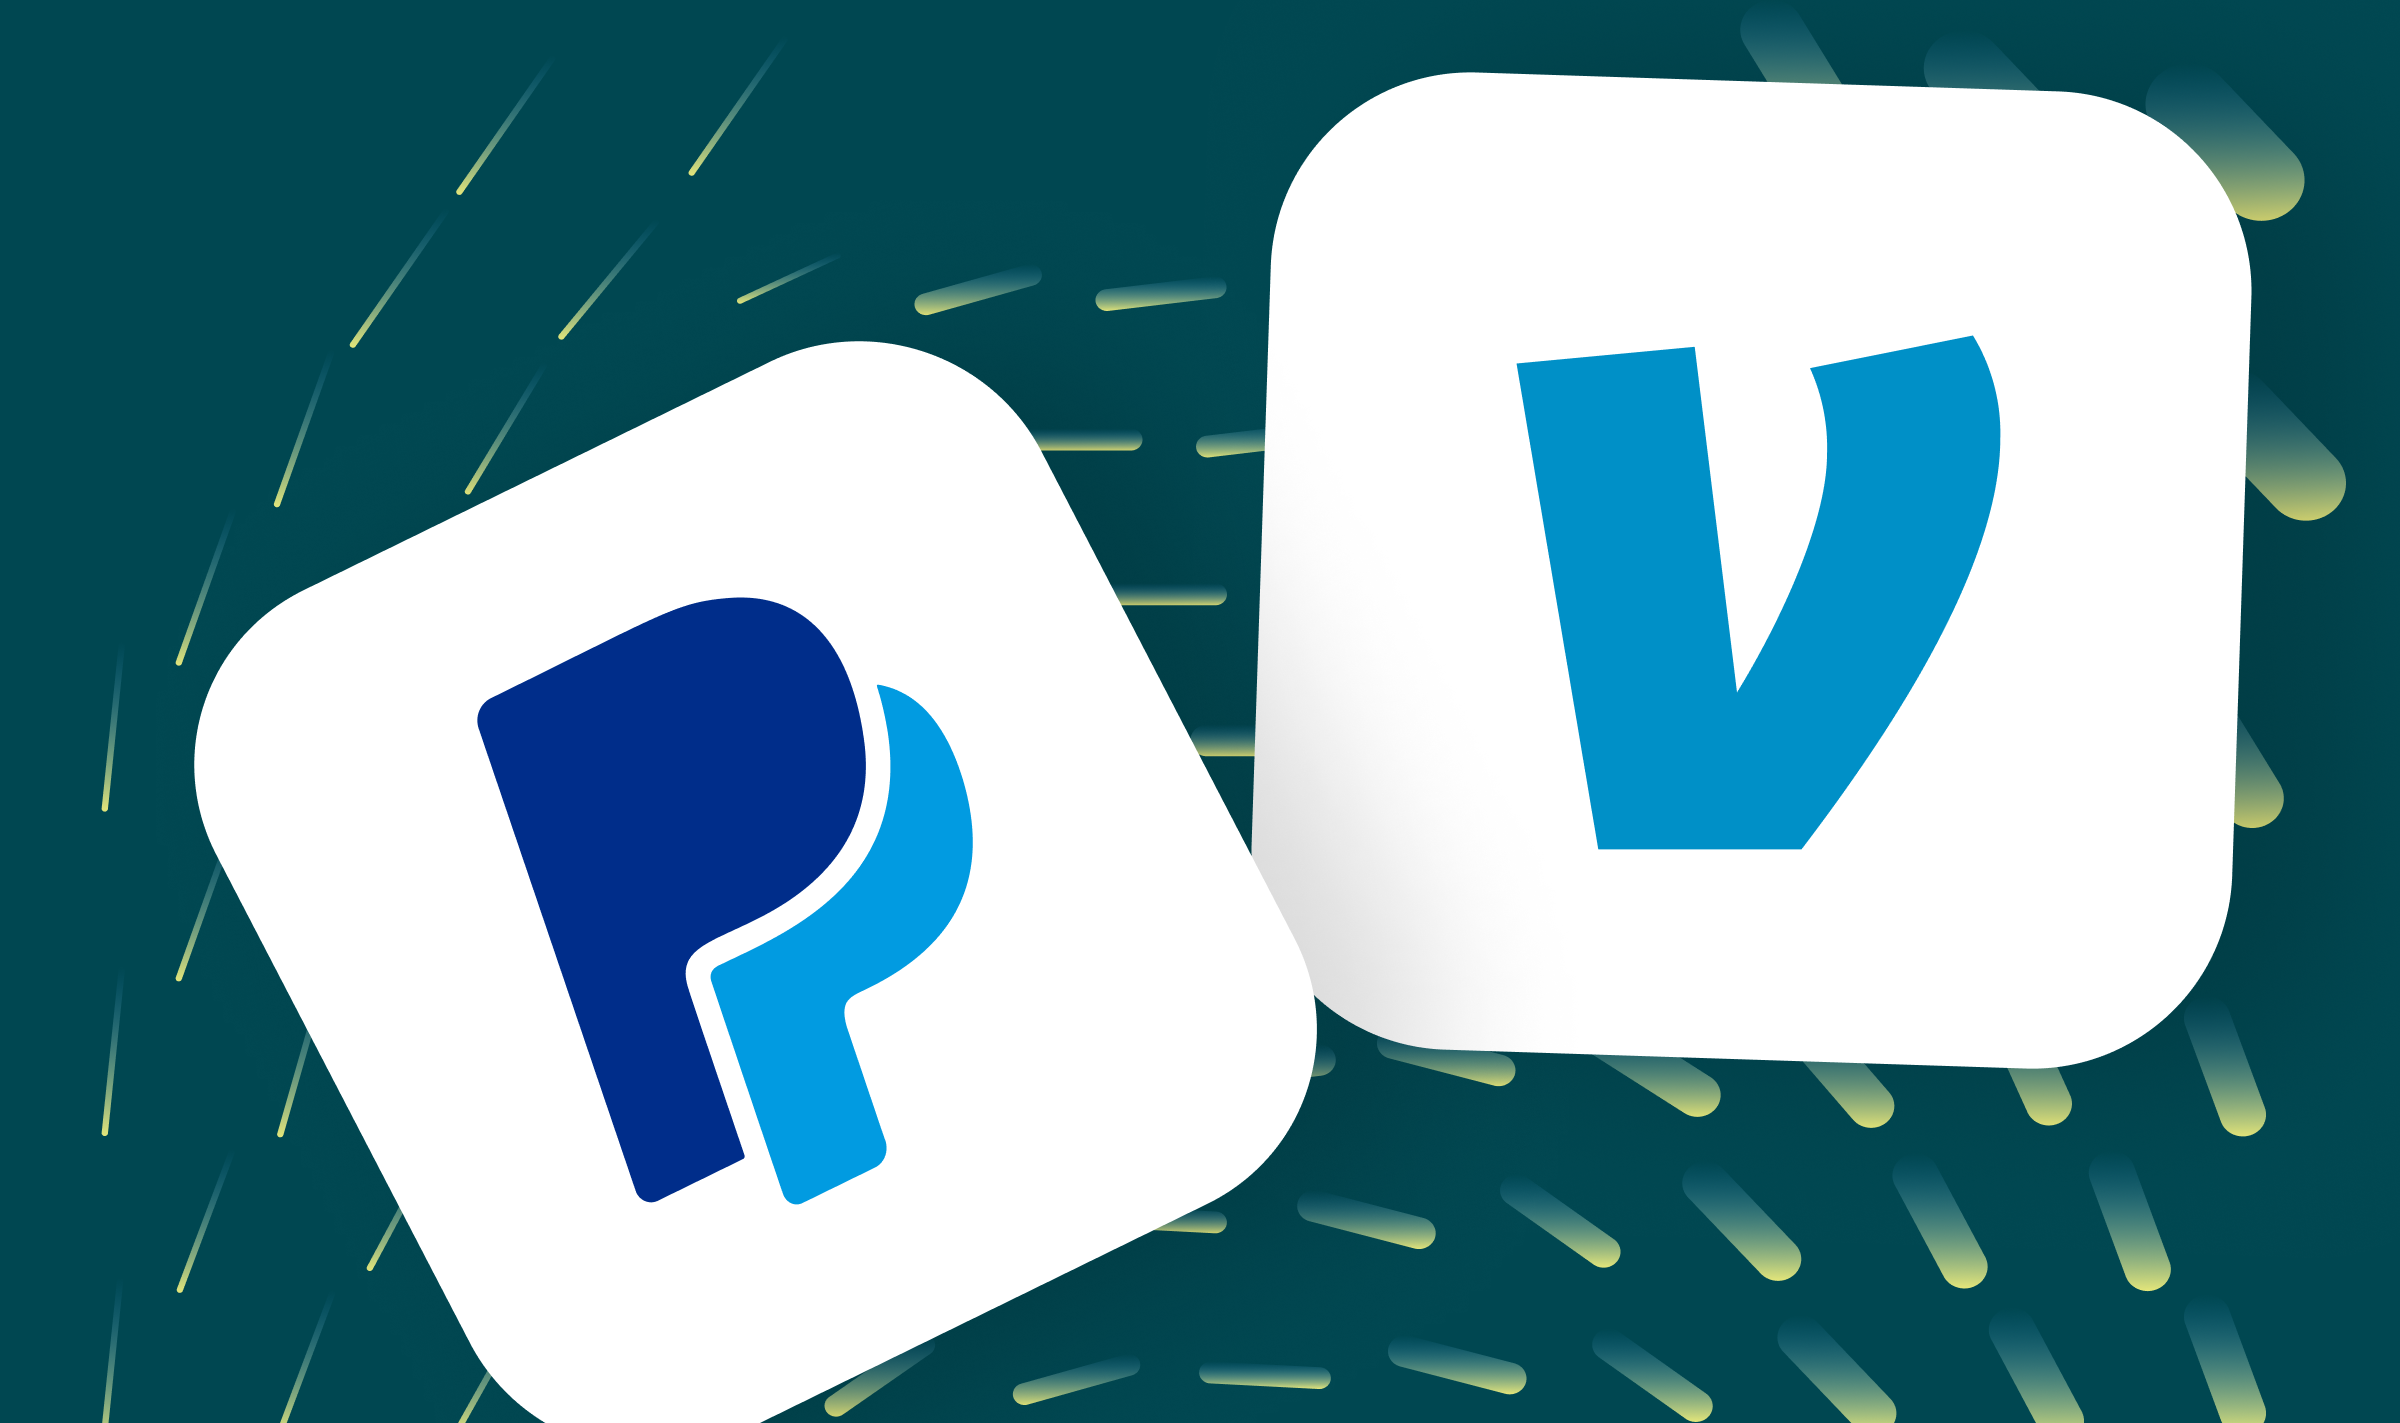 Paypal and Venmo logos on varsity green background